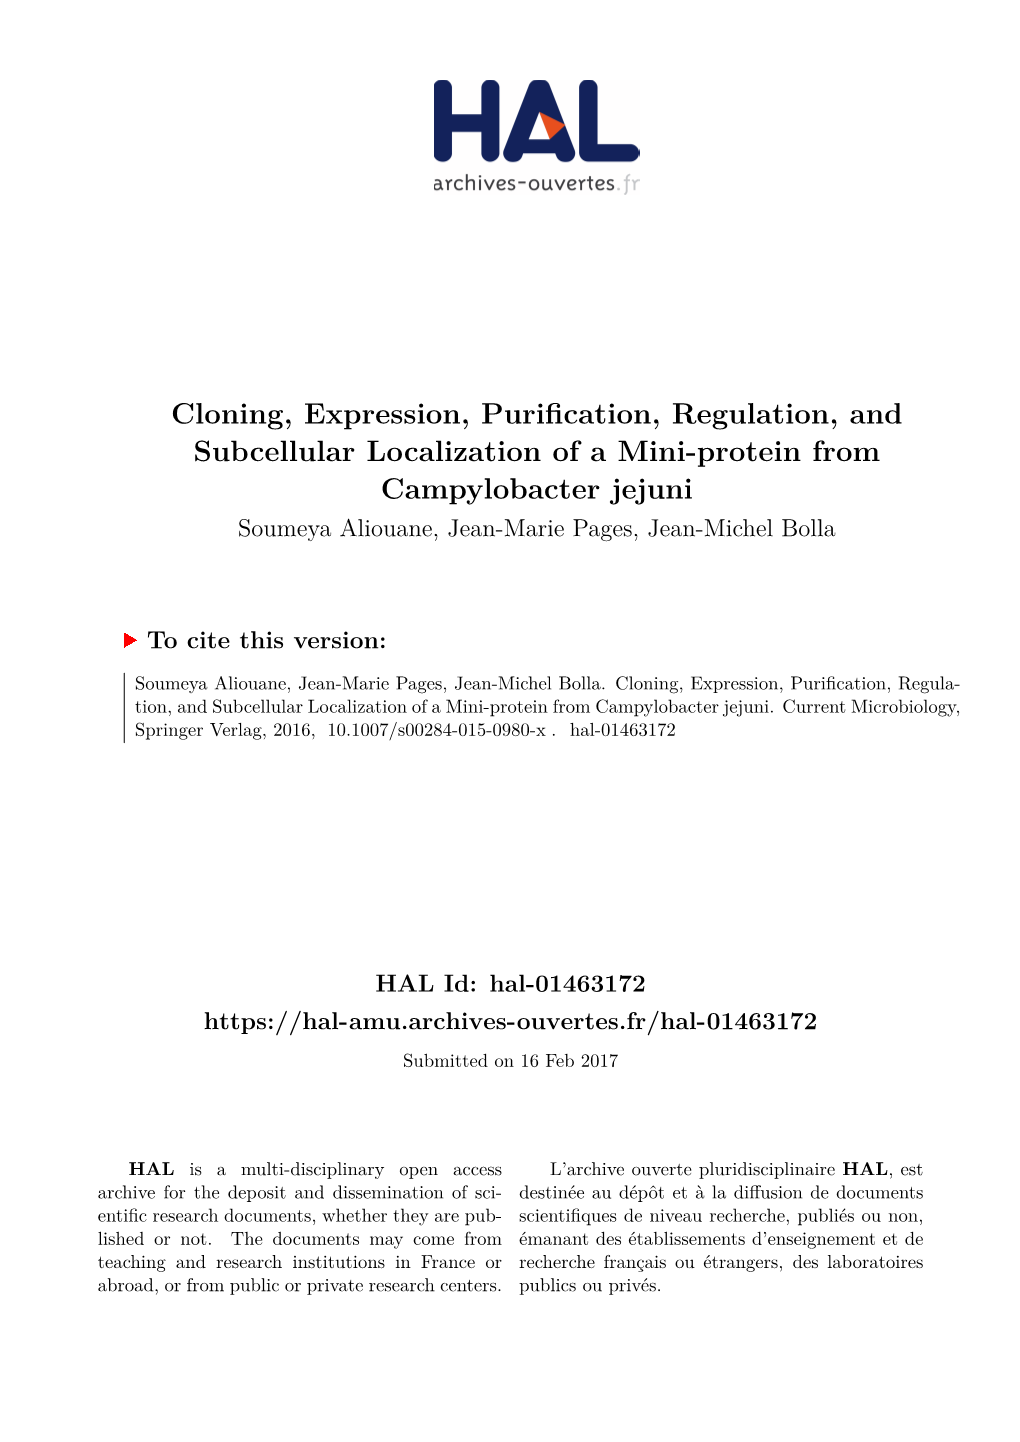 Cloning, Expression, Purification, Regulation, and Subcellular